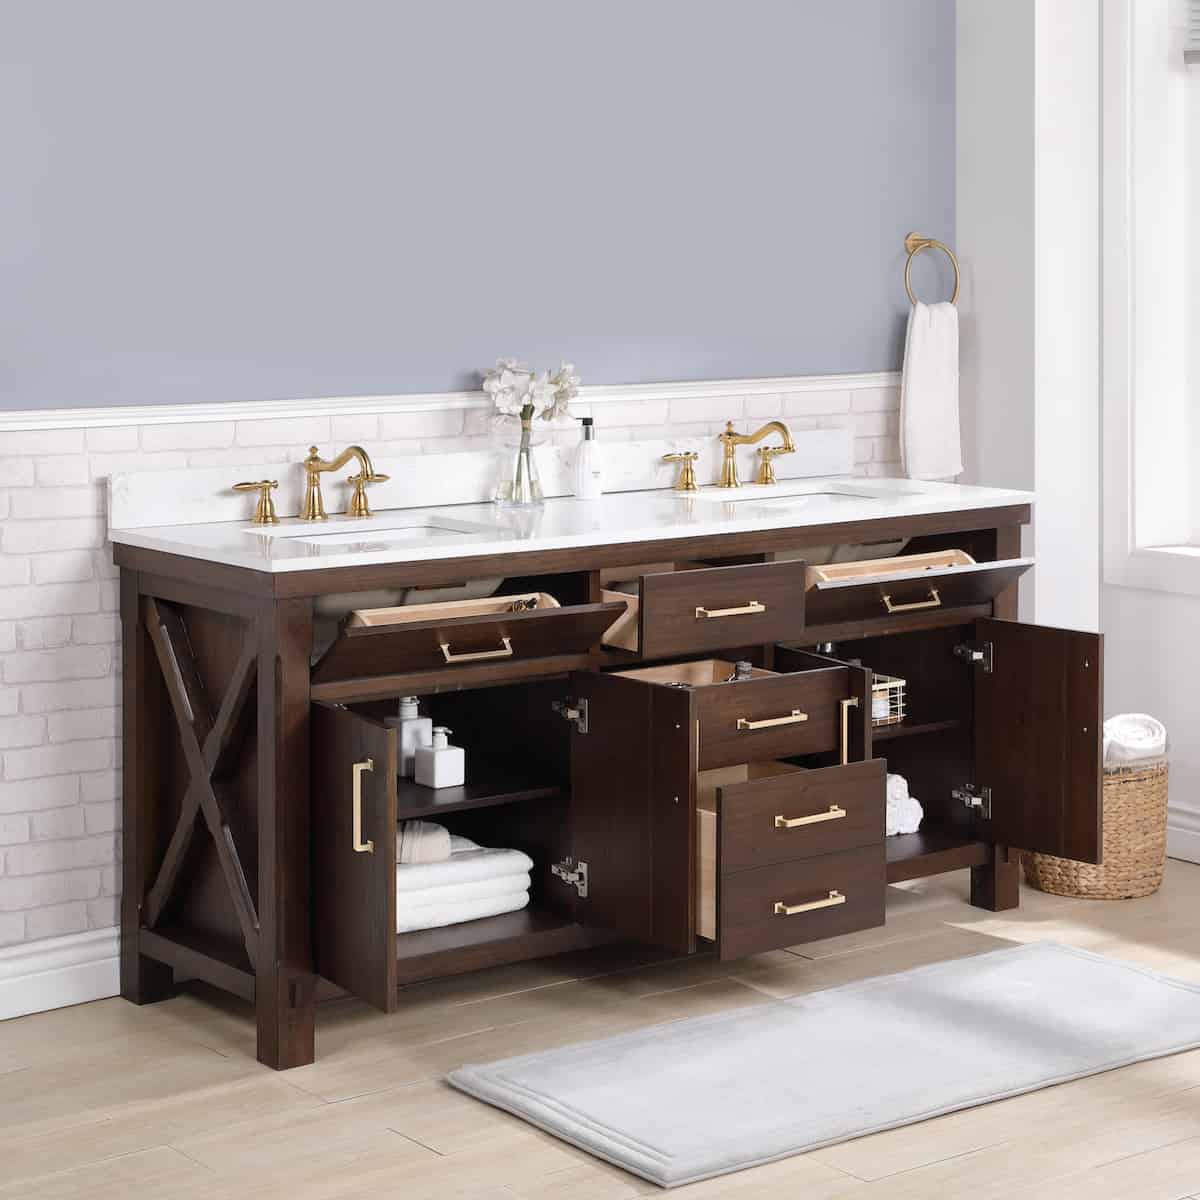 Vinnova Viella 72 Inch Freestanding Double Sink Bath Vanity in Deep Walnut Finish with White Composite Countertop Without Mirror Inside 701872-DW-WS-NM